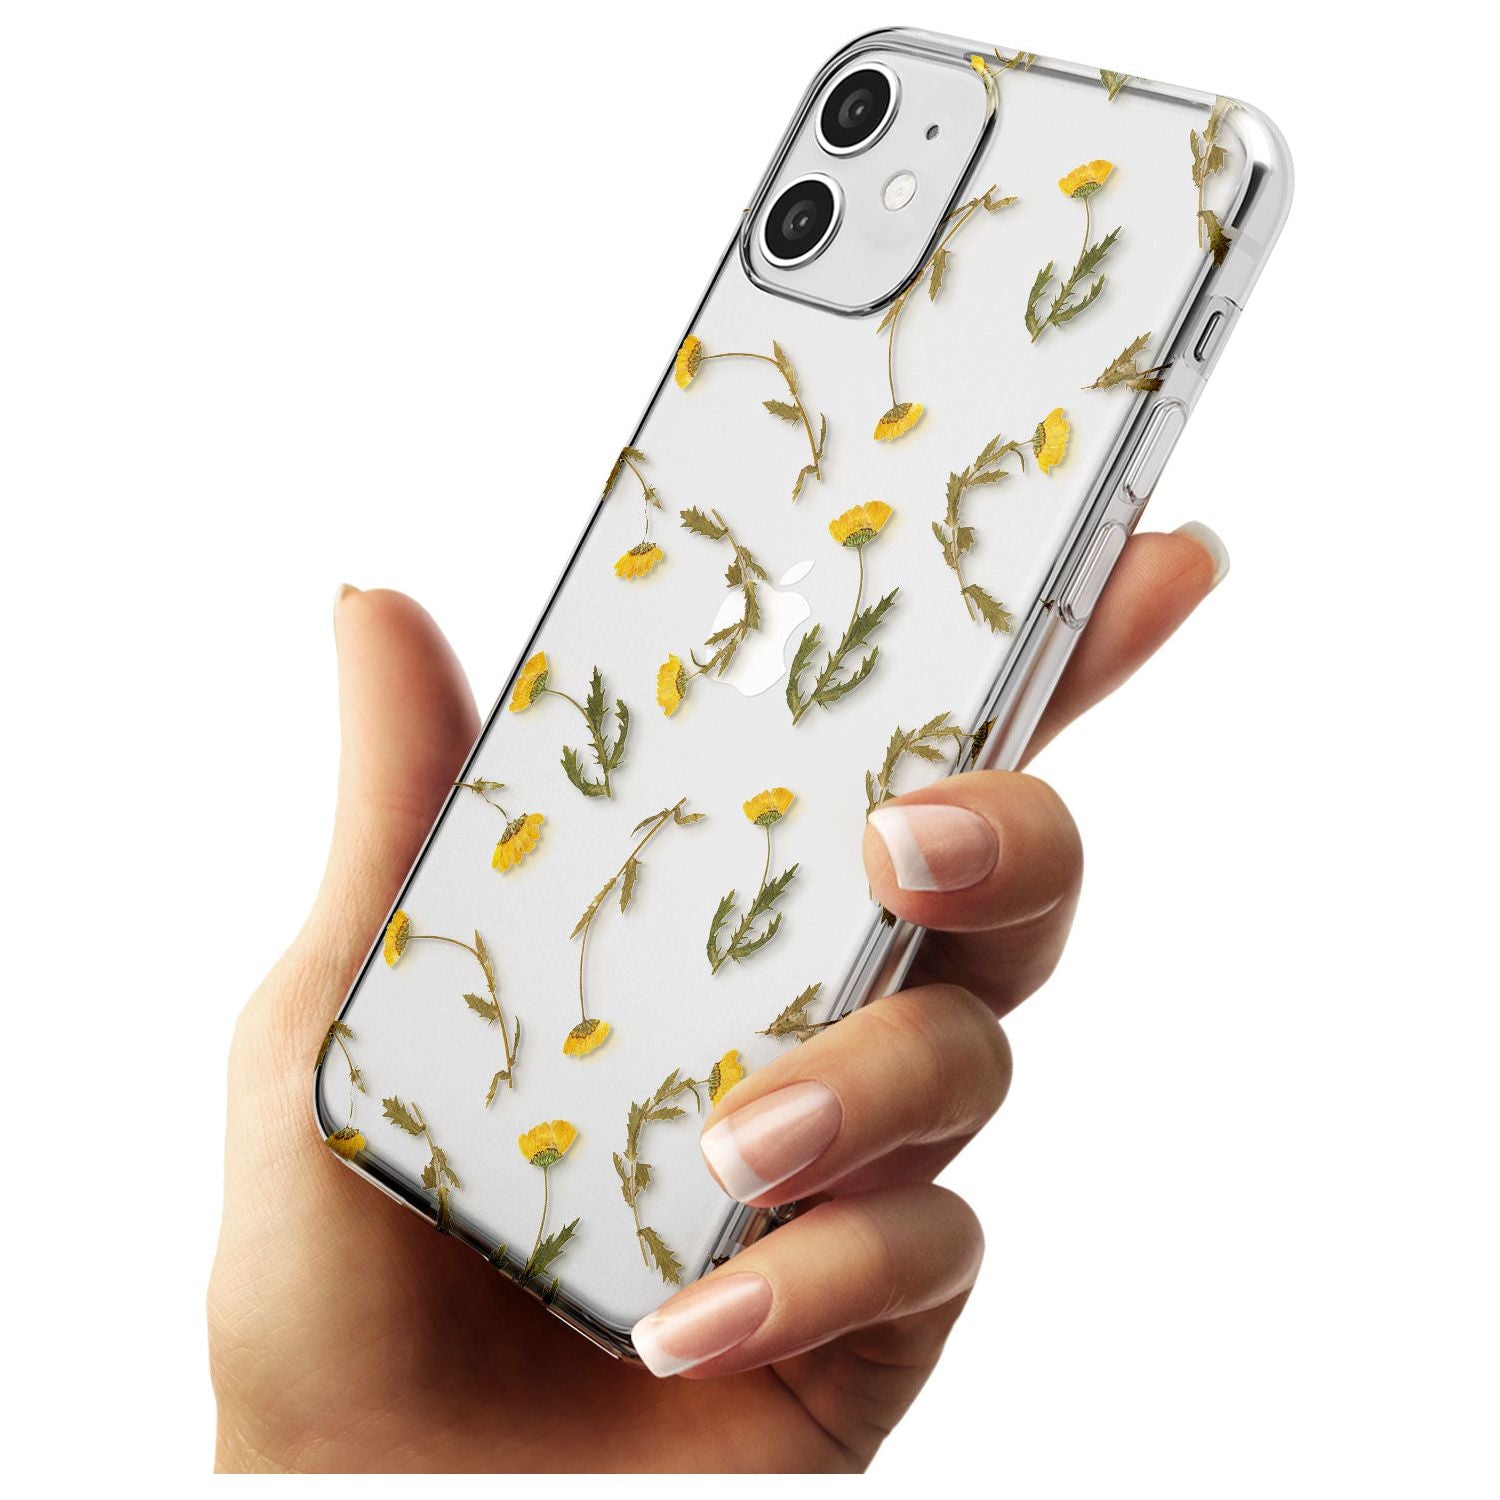 Long Stemmed Wildflowers - Dried Flower-Inspired Slim TPU Phone Case for iPhone 11